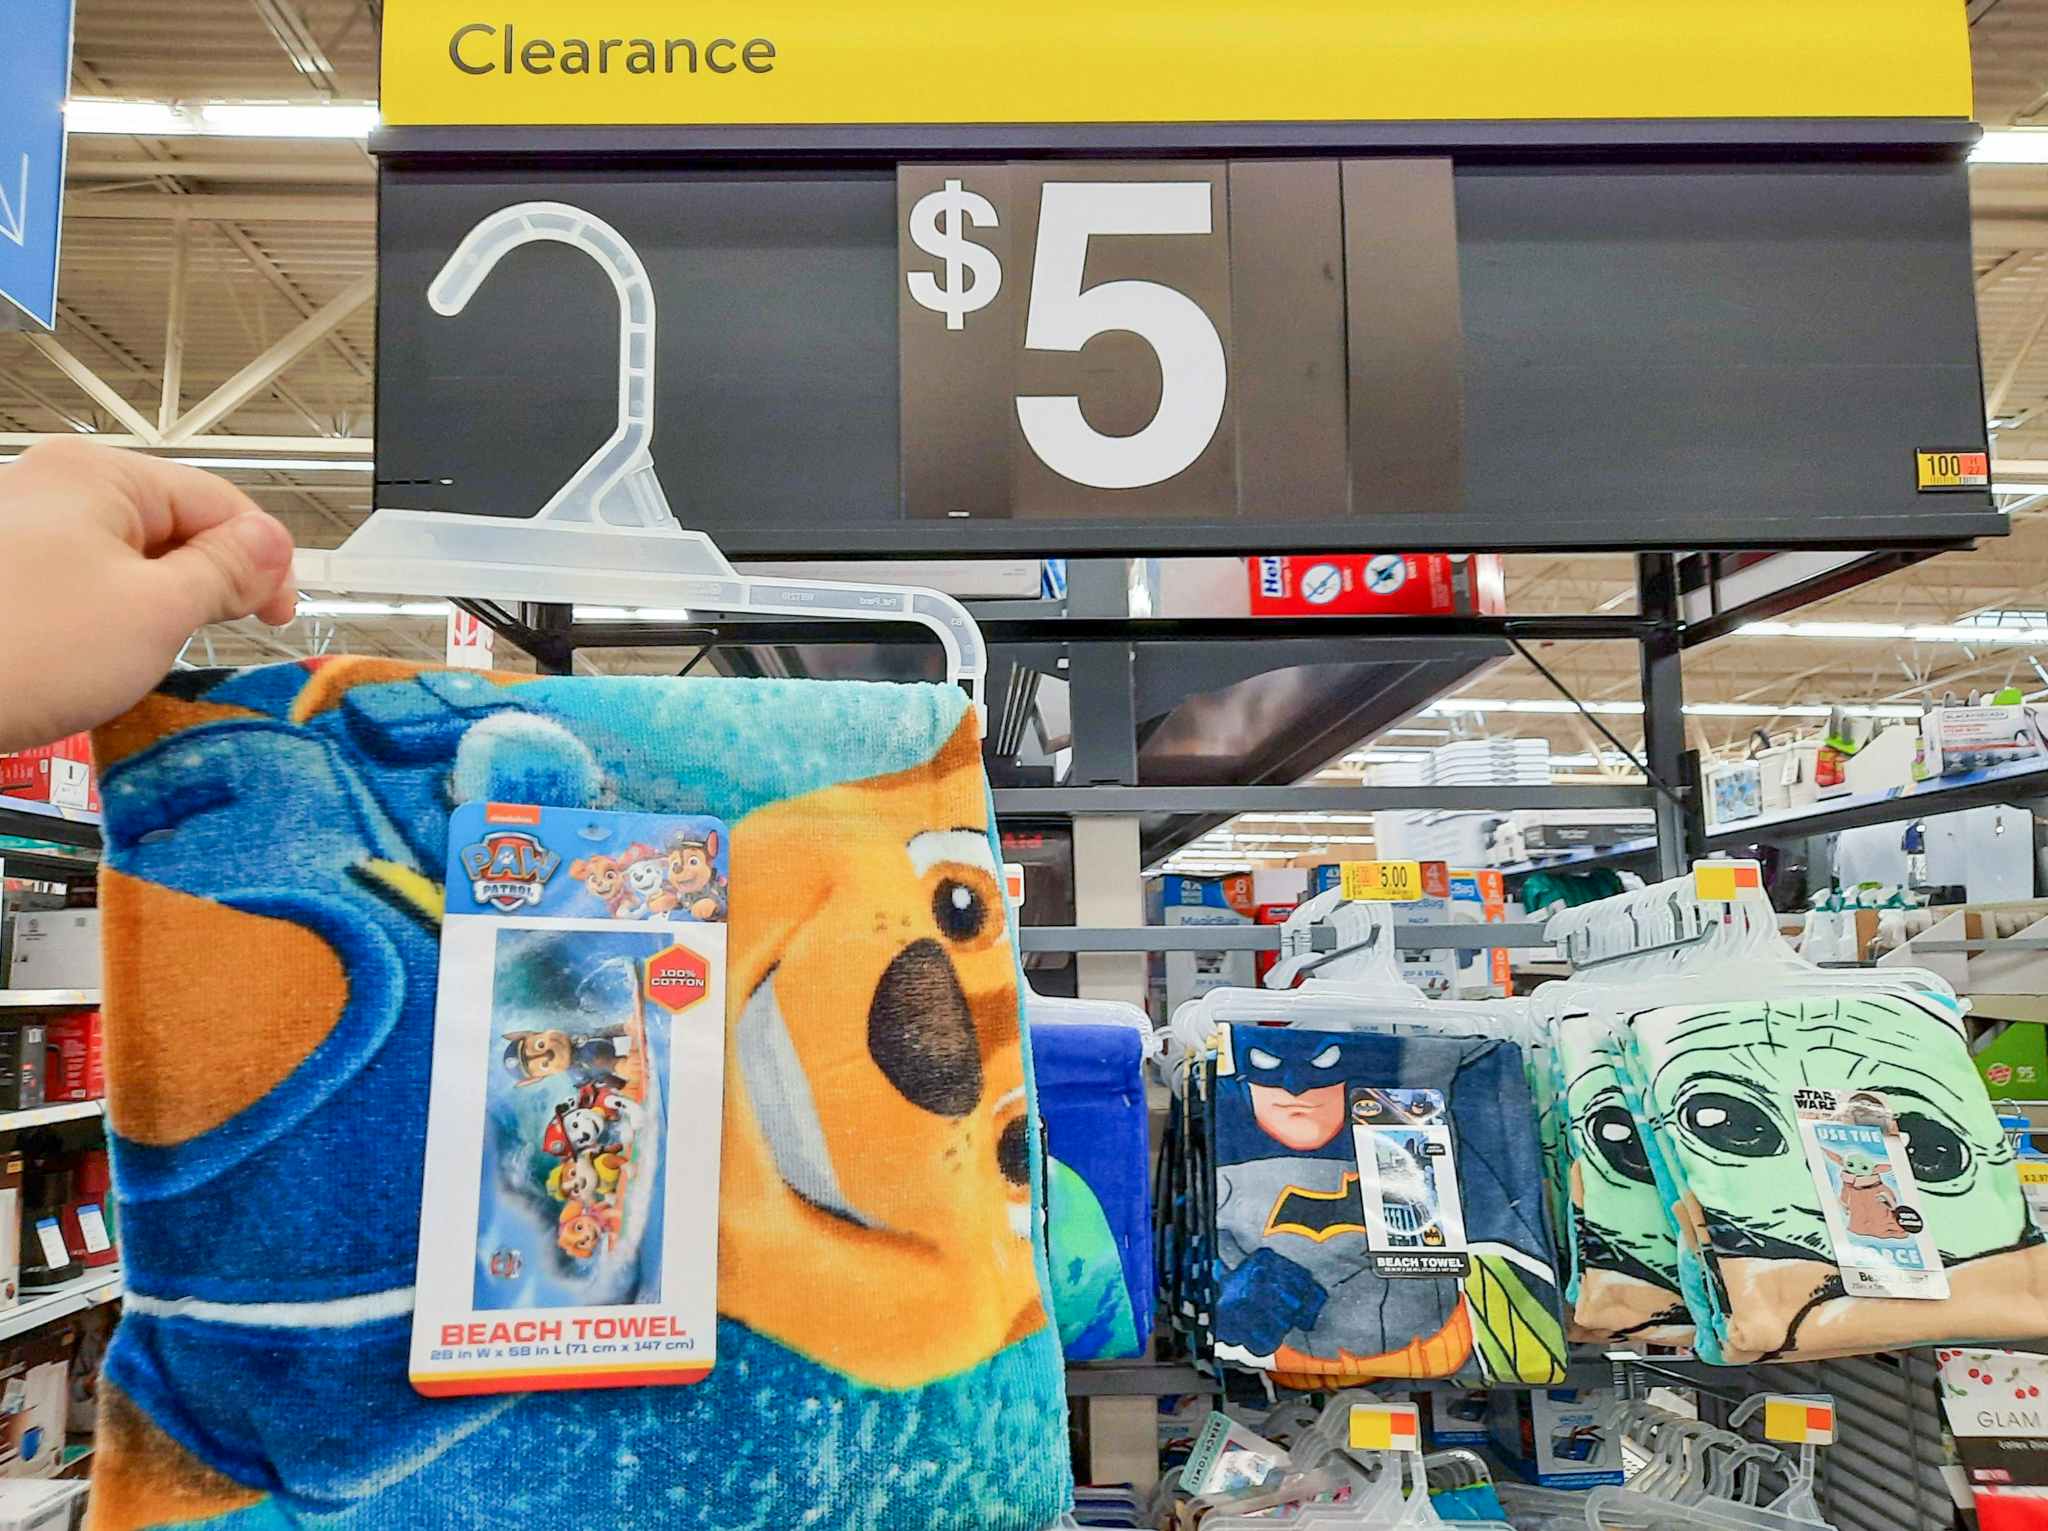 PAW Patrol Beach Towel held in front of $5 clearance sign.